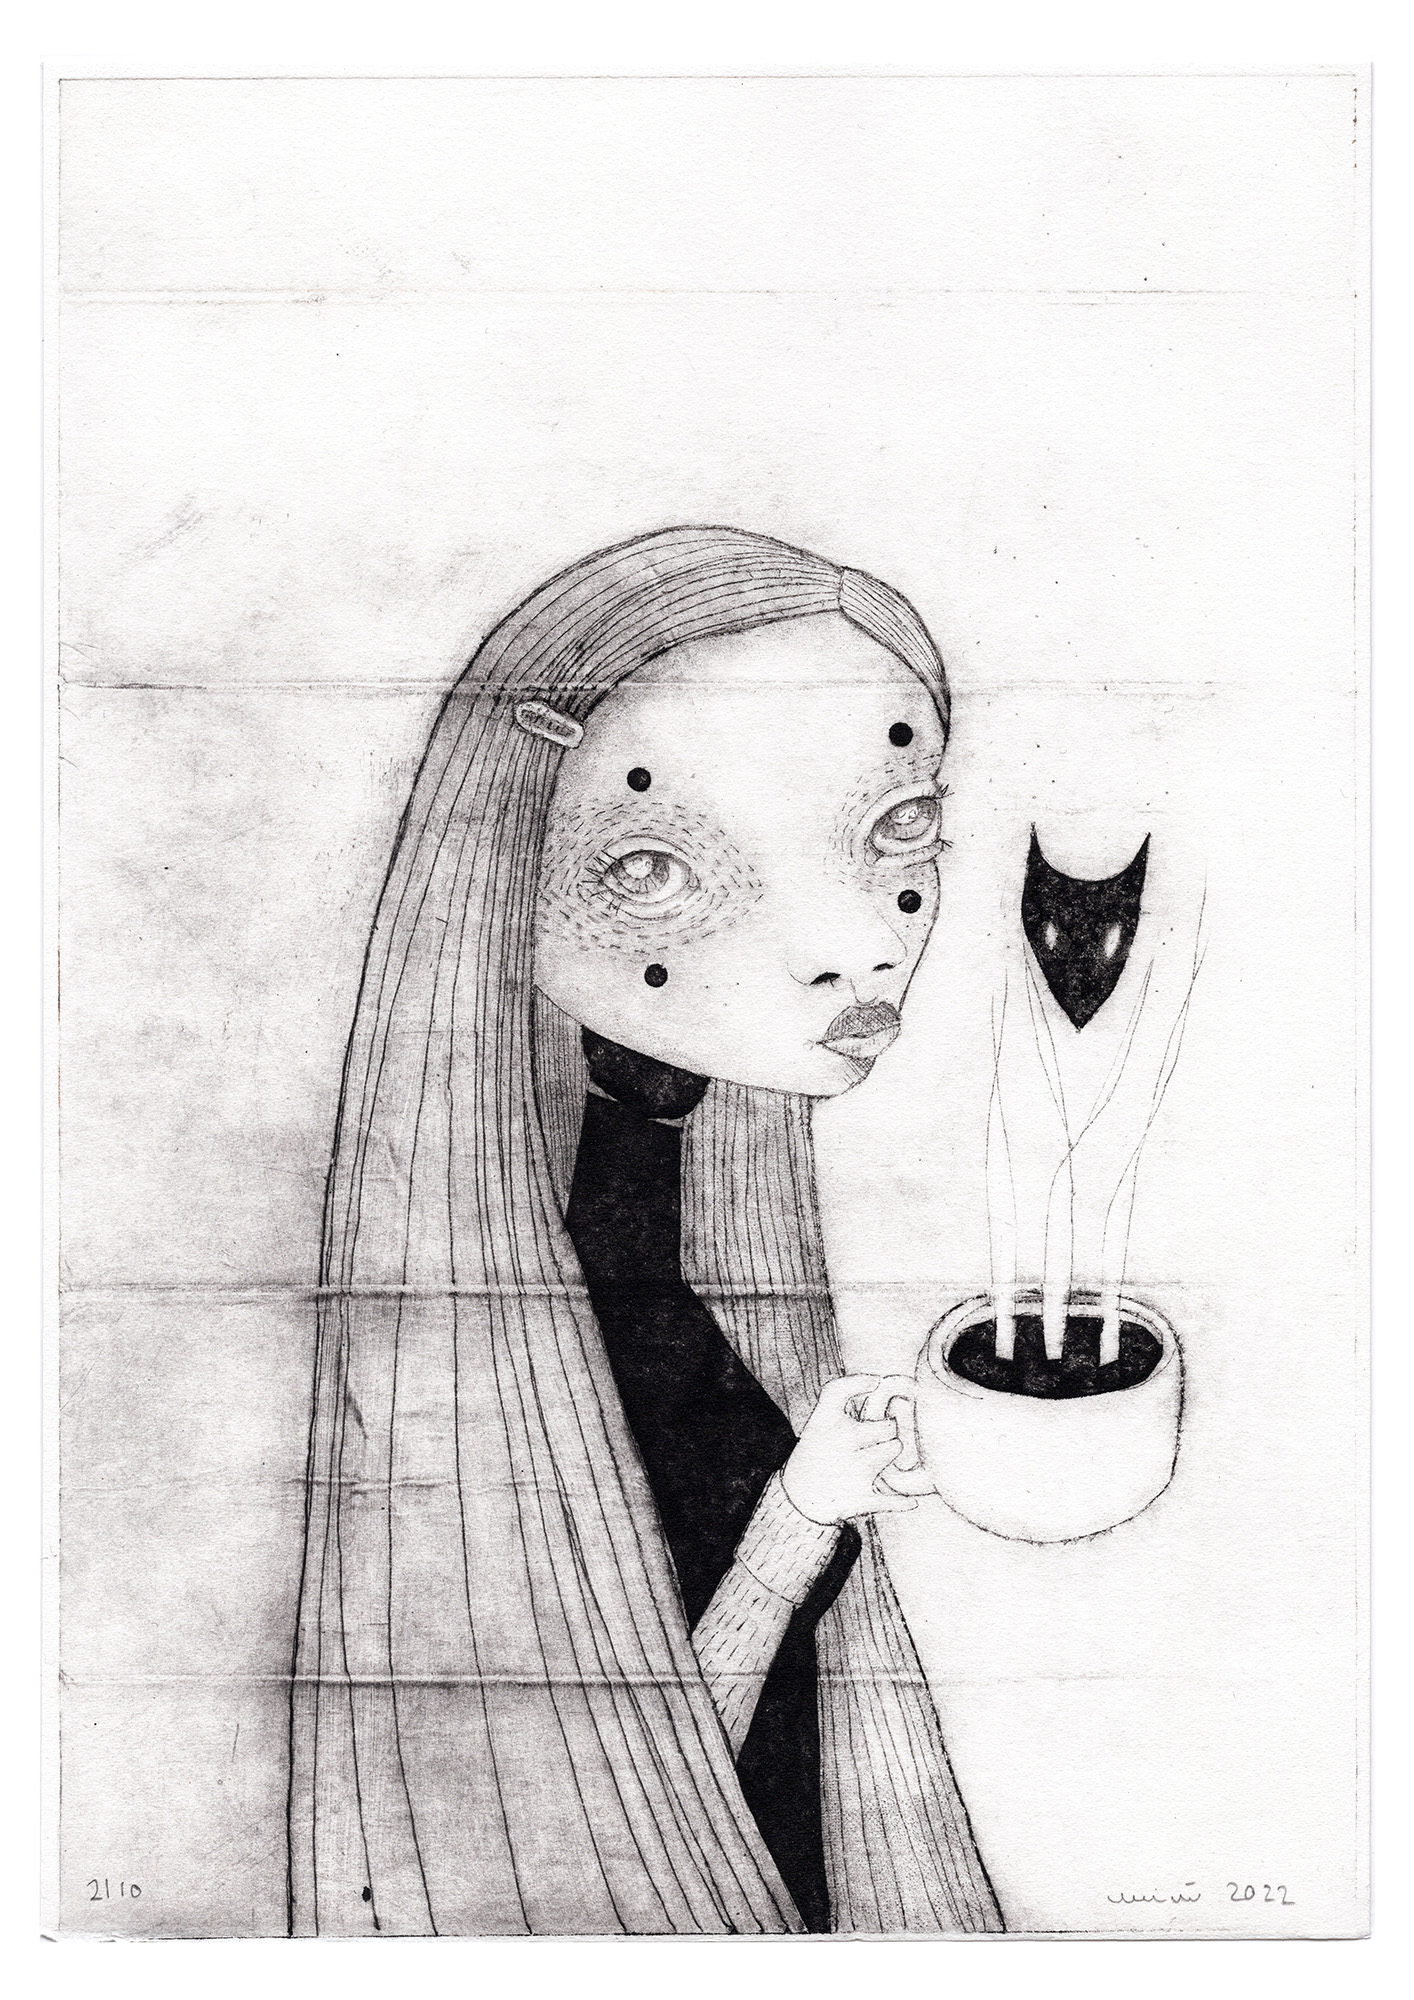 Conversations with my teacup, Collagraph print by minu